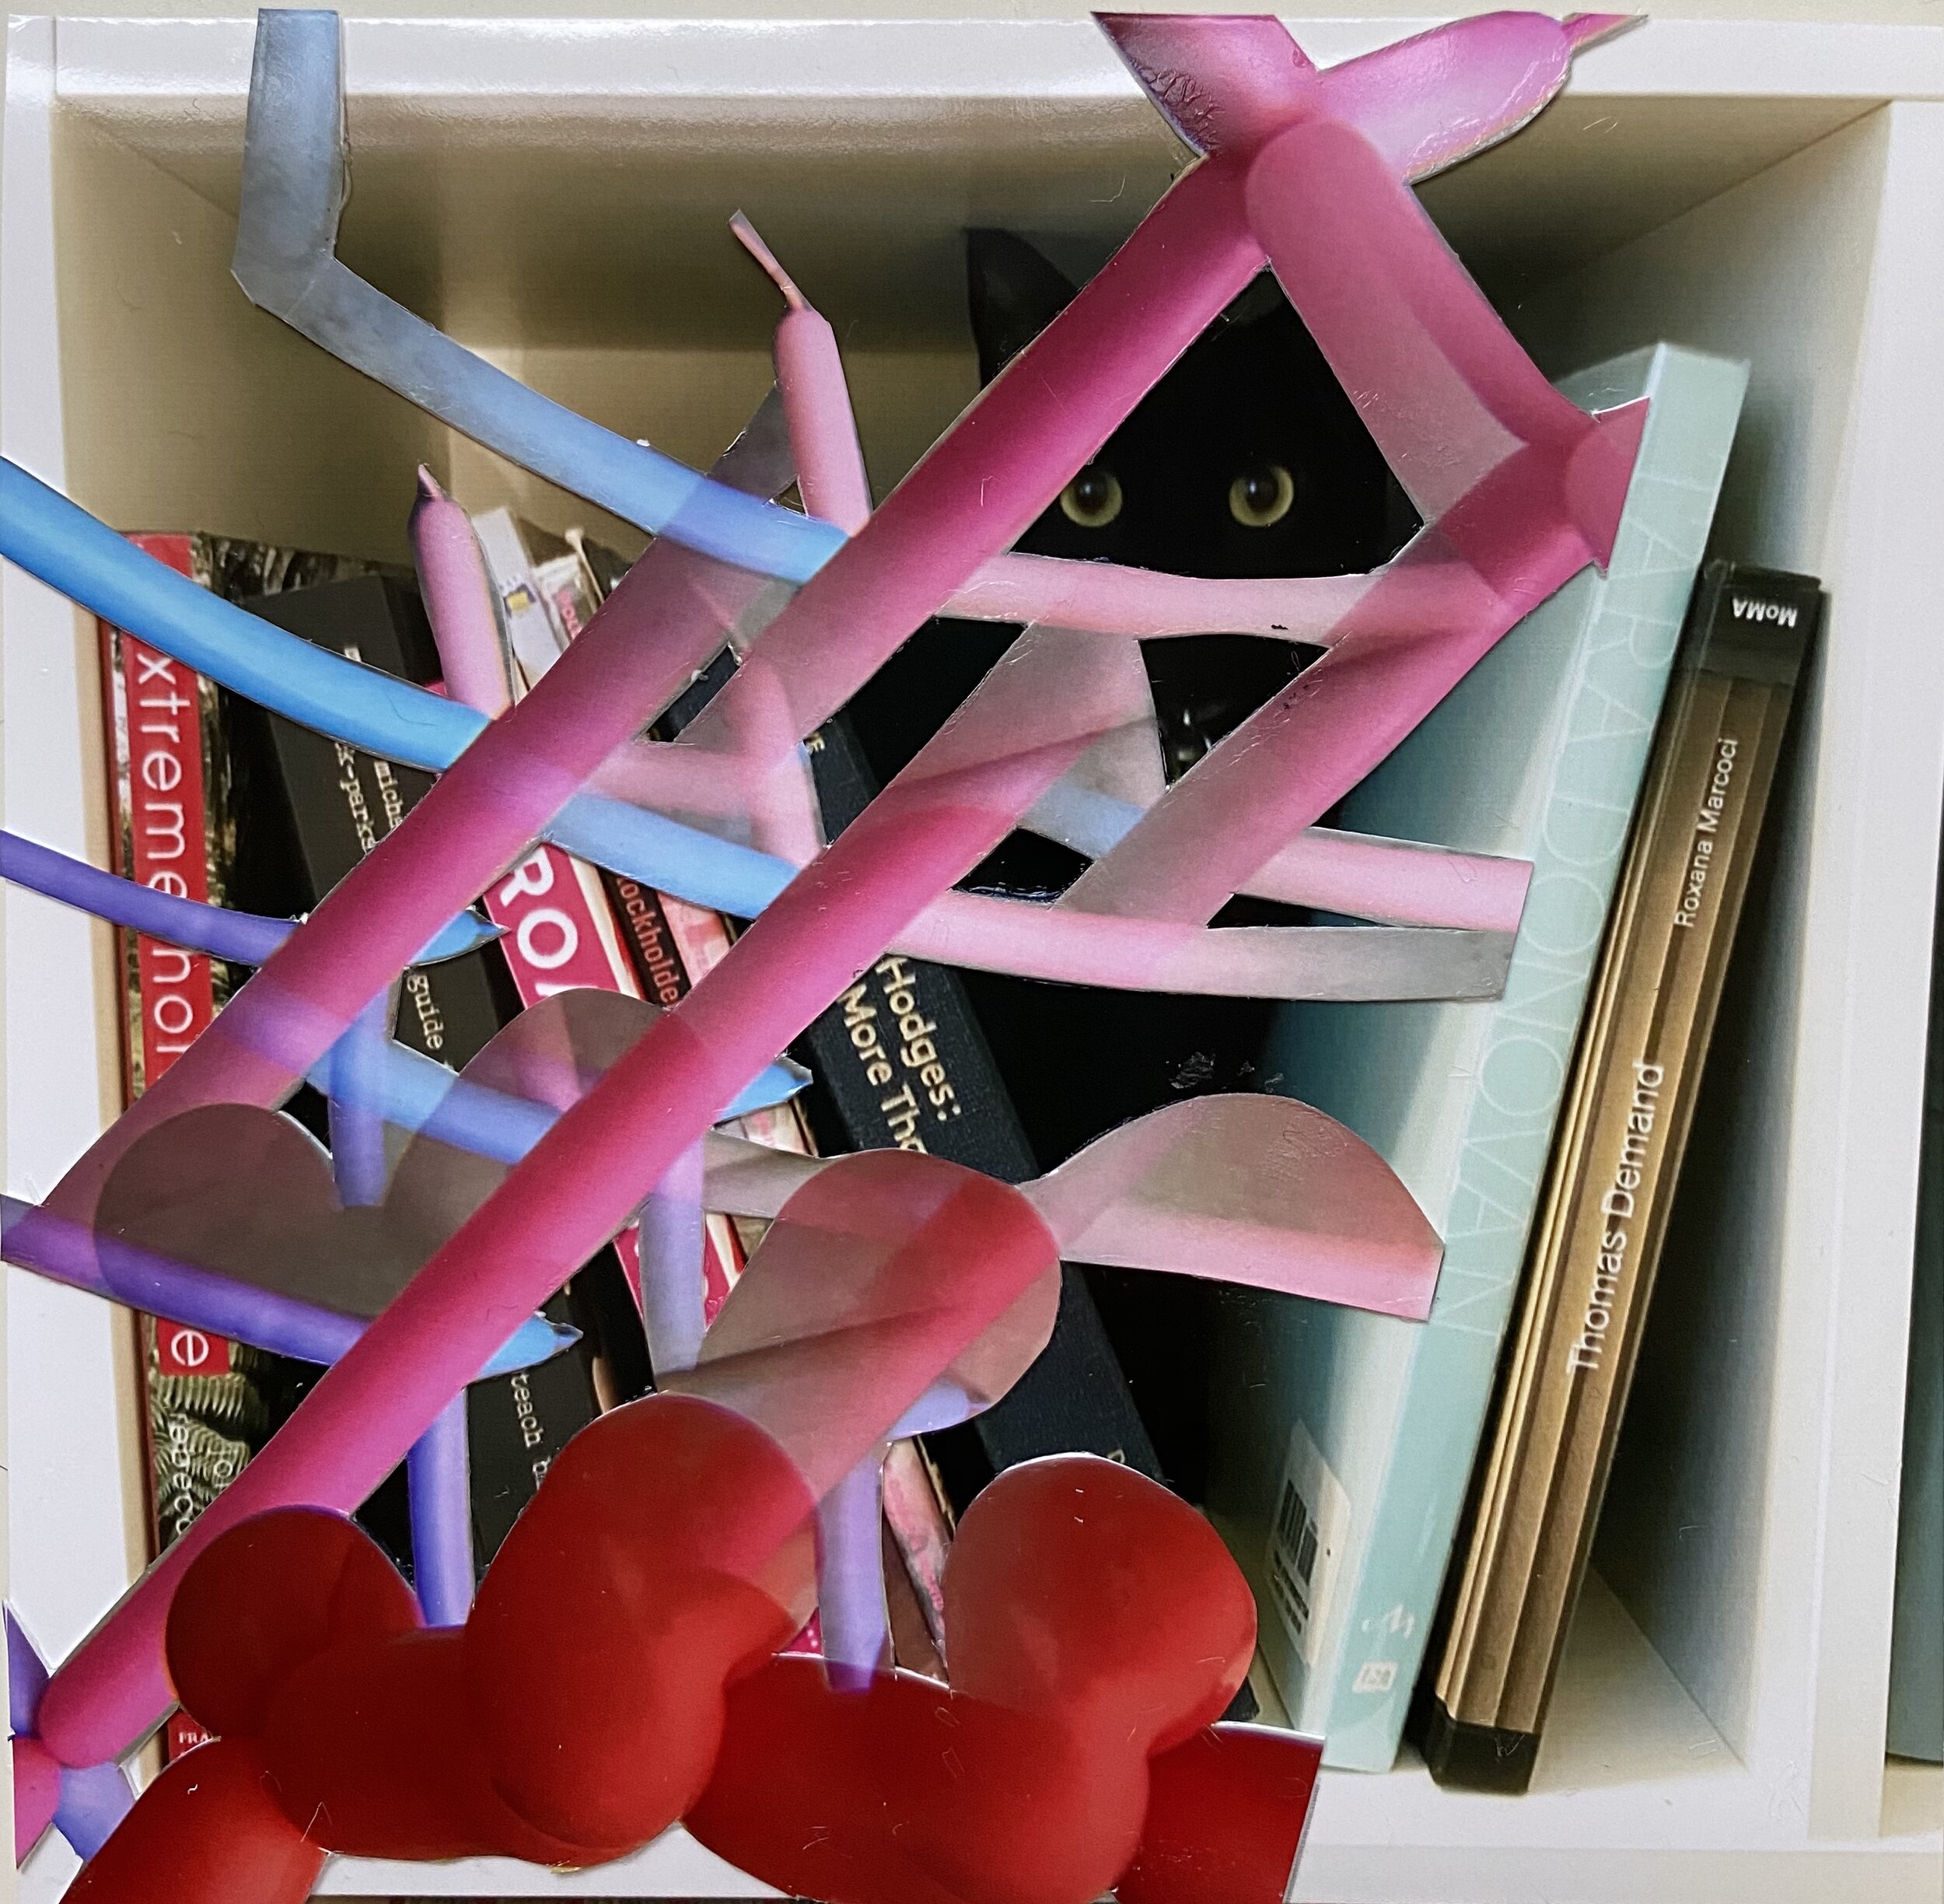 book shelf and balloons